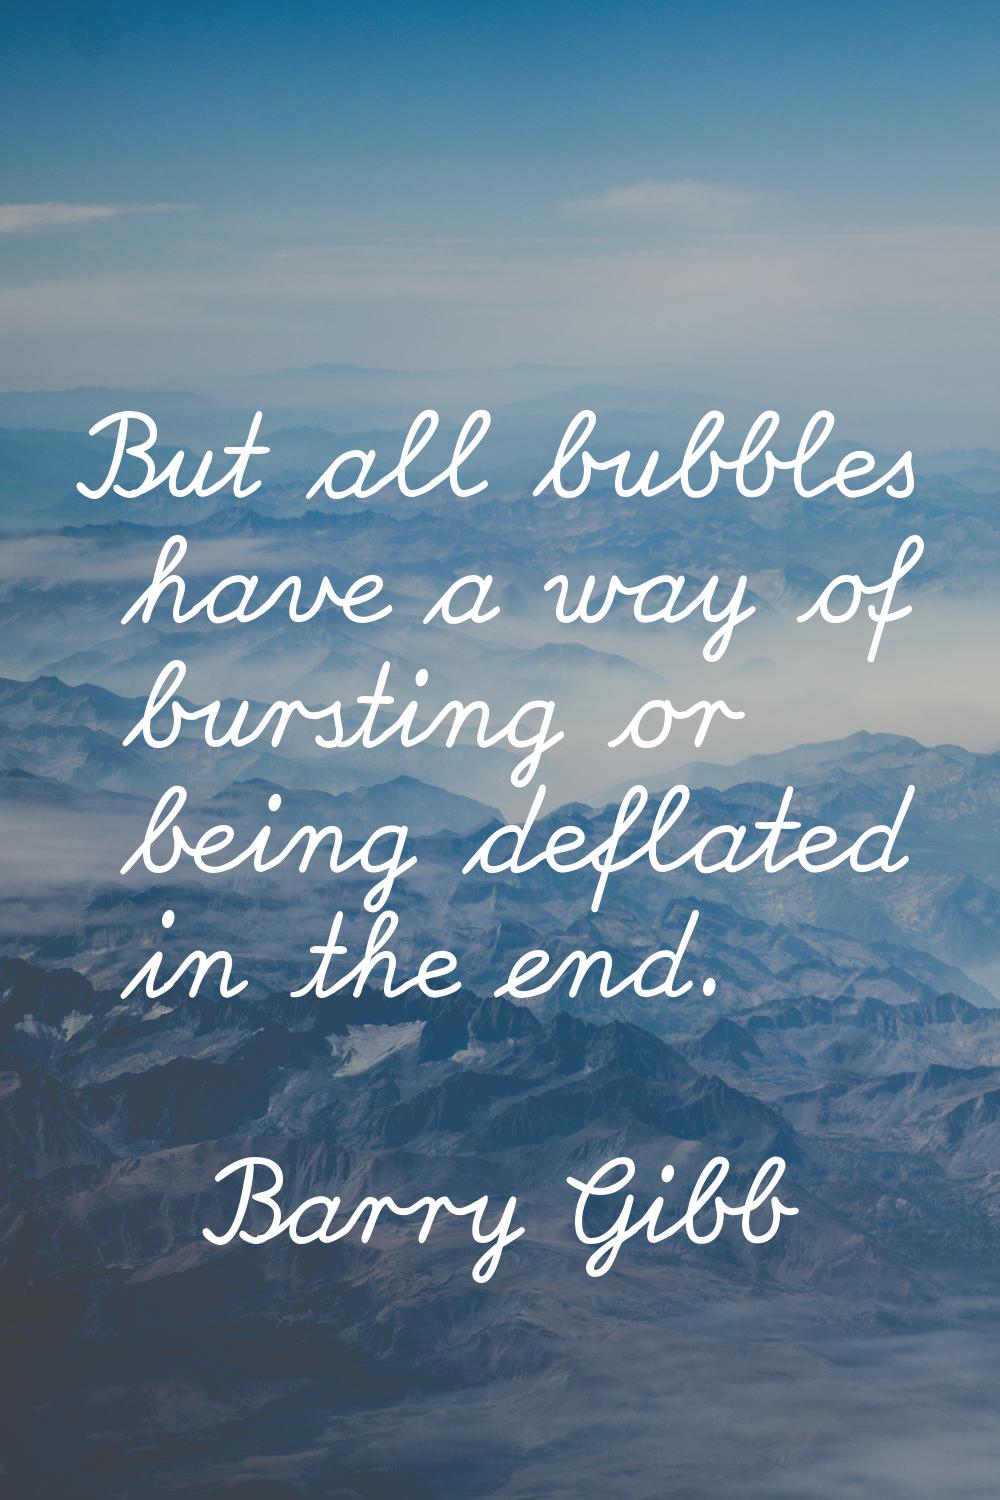 But all bubbles have a way of bursting or being deflated in the end.